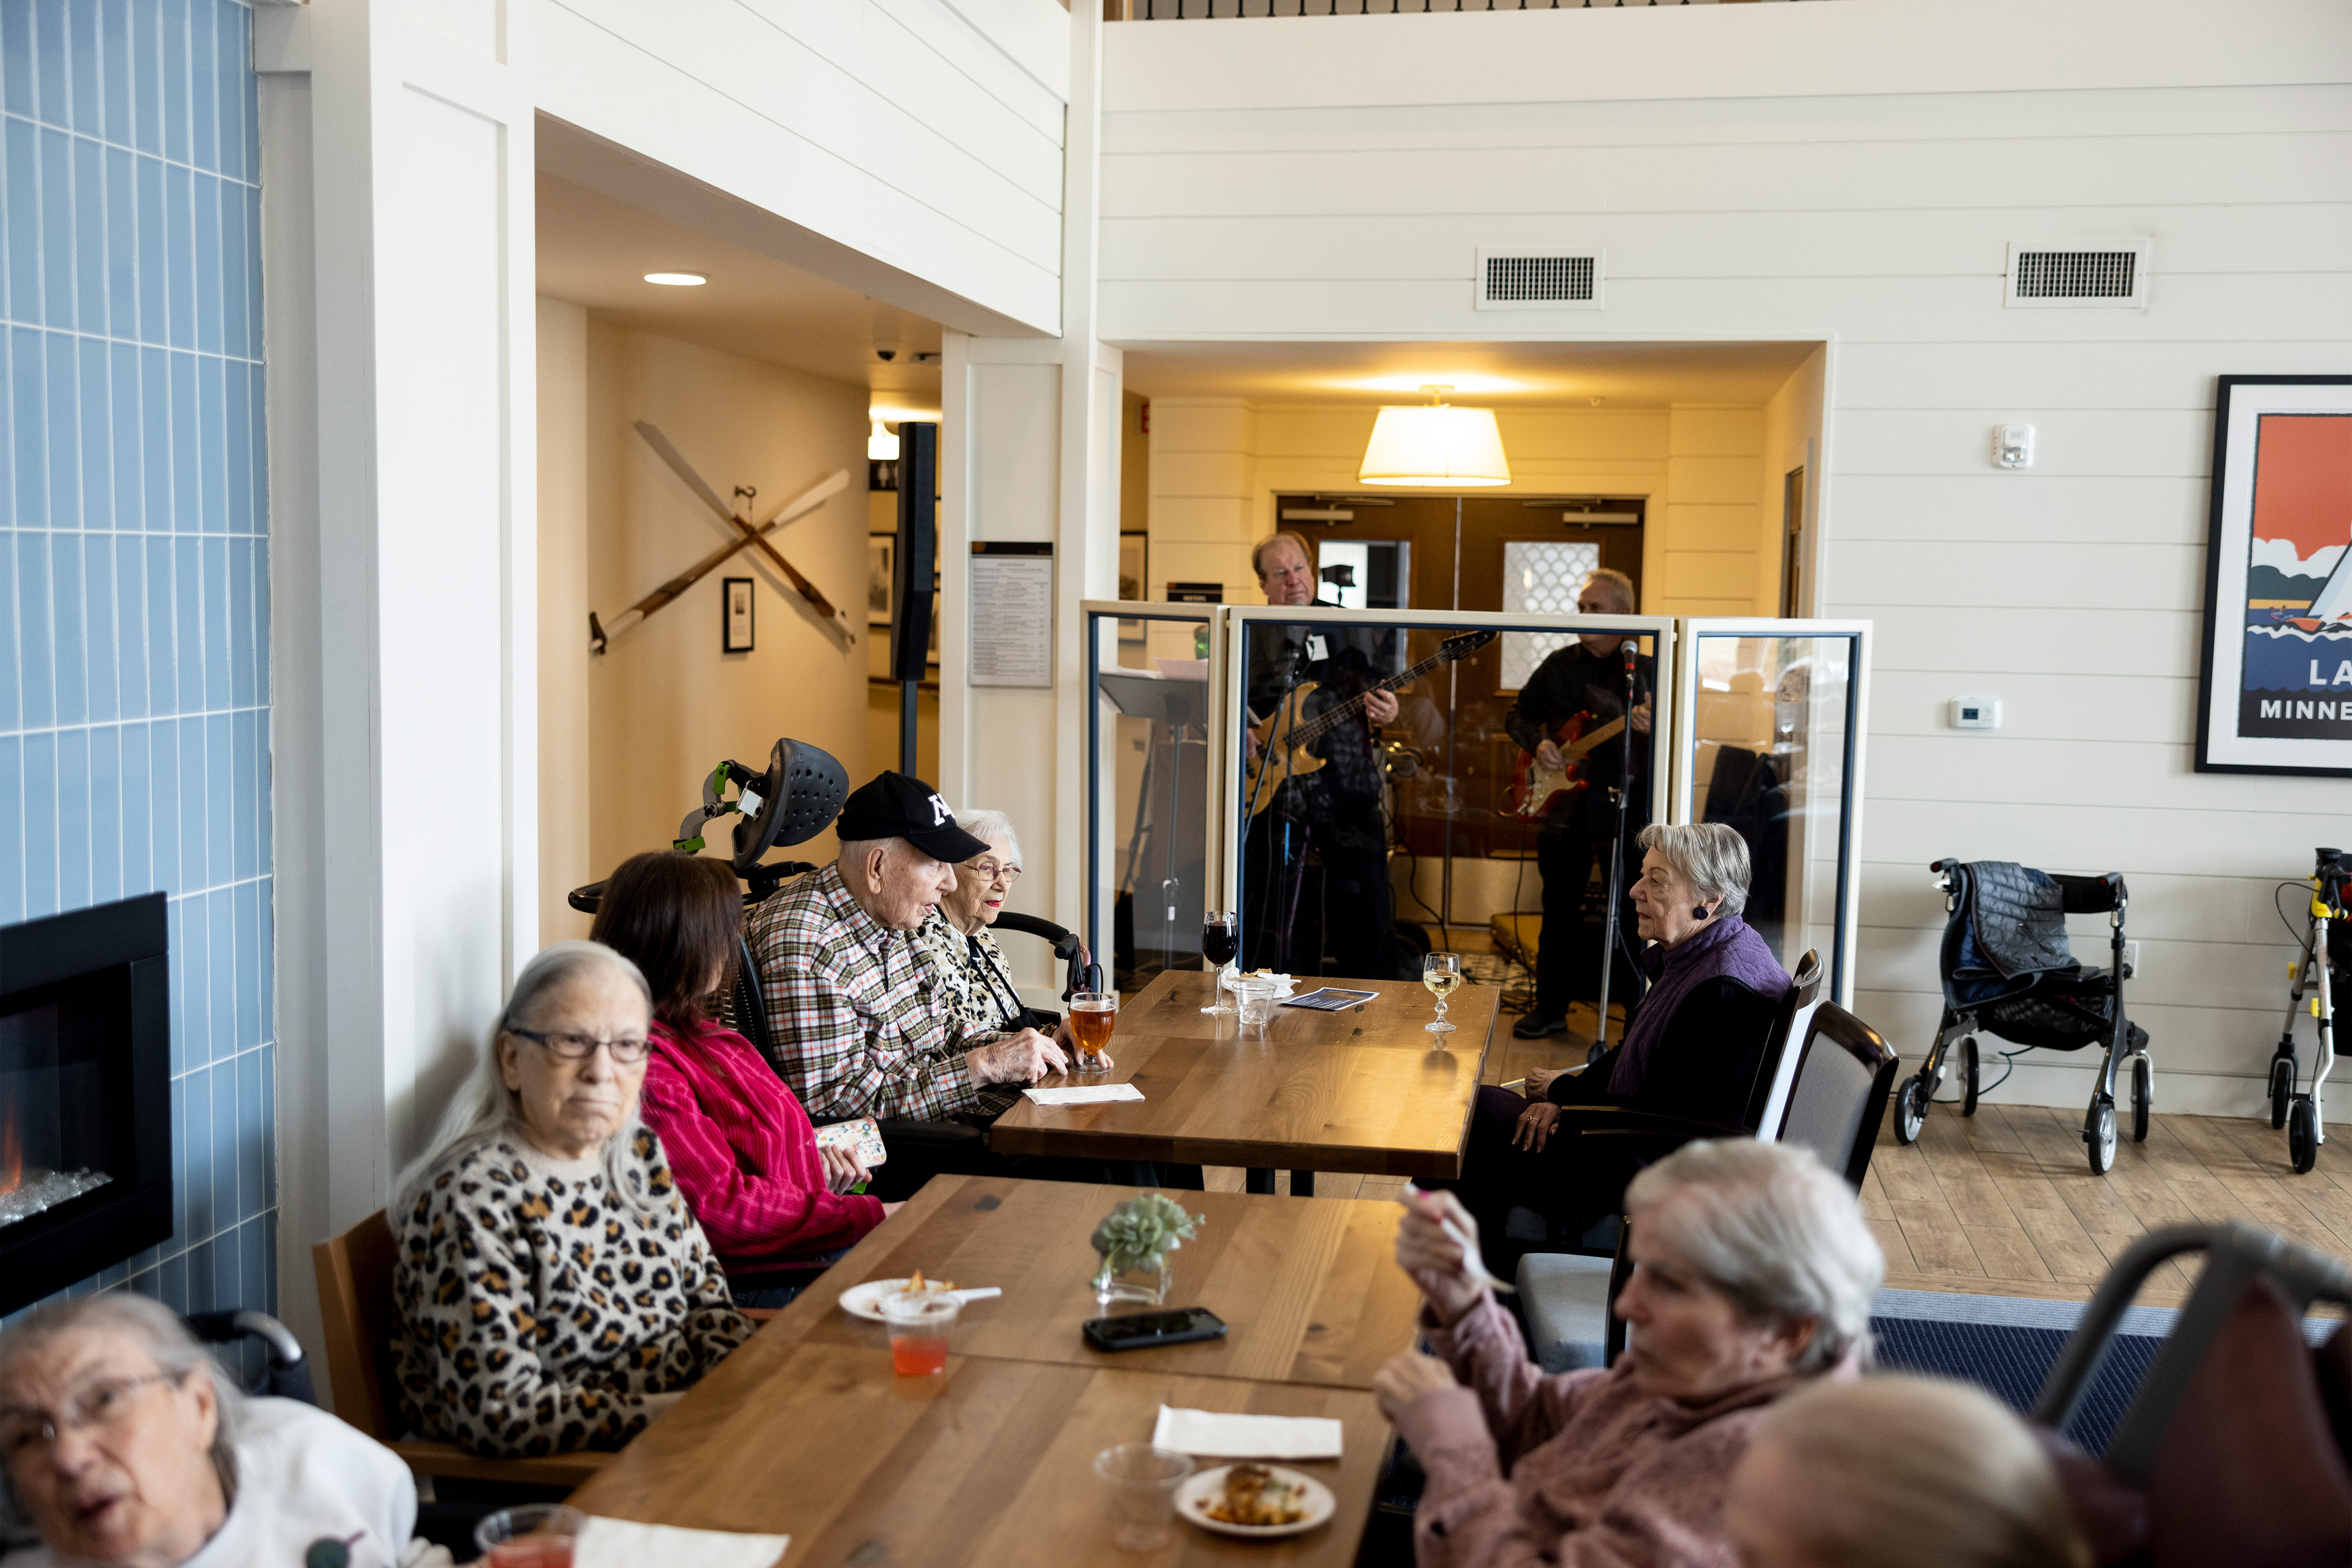 A photo of elderly residents of an assisted living facility sitting around a table and chatting.